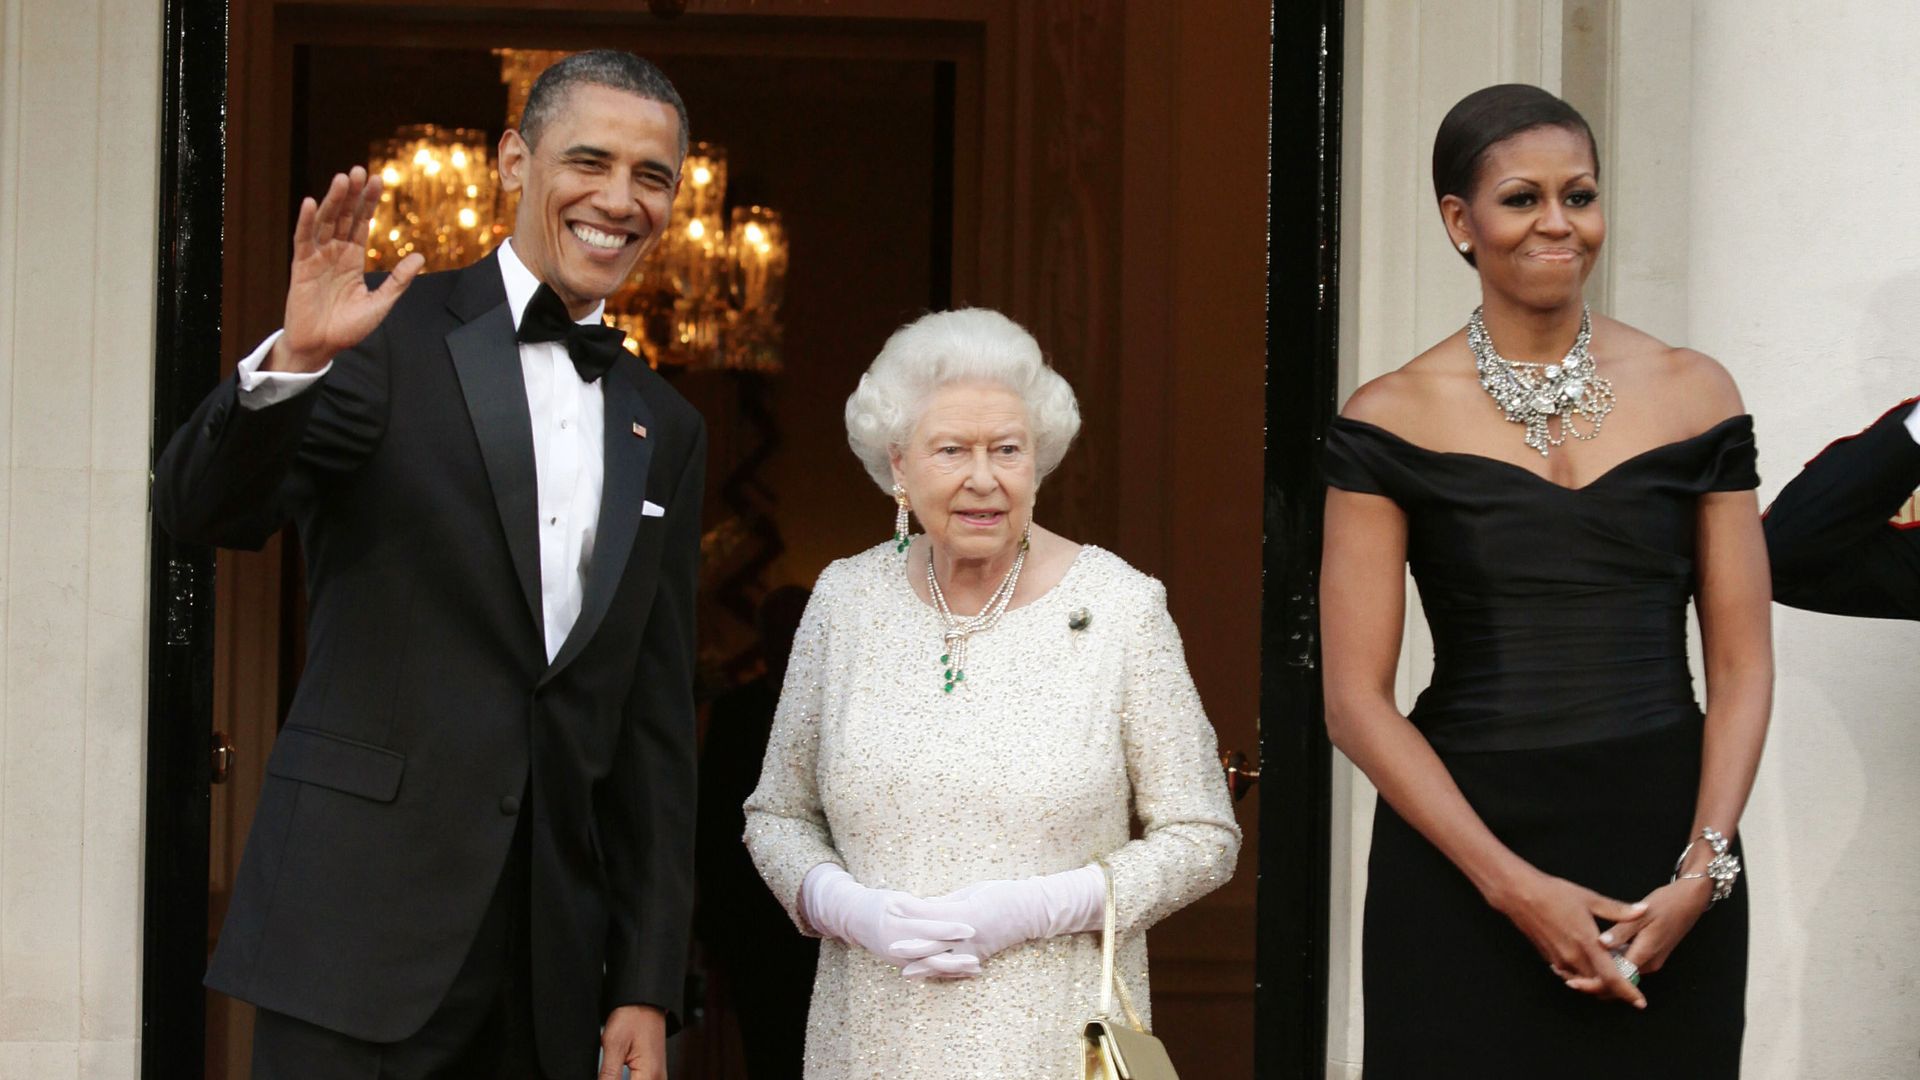 Michelle and Barack Obama with Queen Elizabeth II at Winfield House